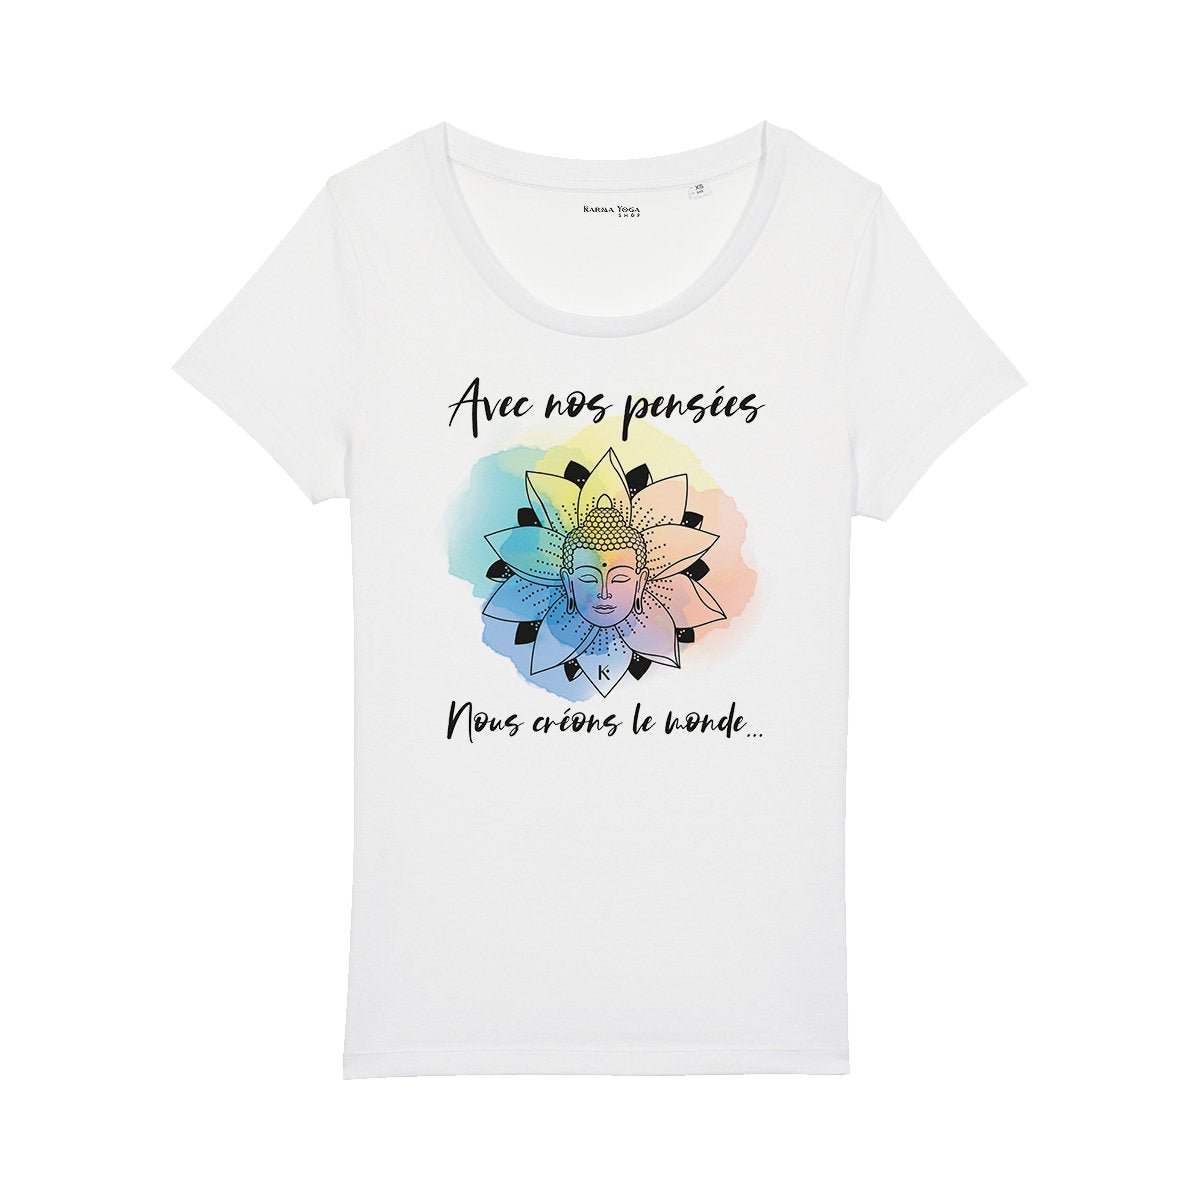 Women's T-Shirt "Let's create the world" in Organic Cotton